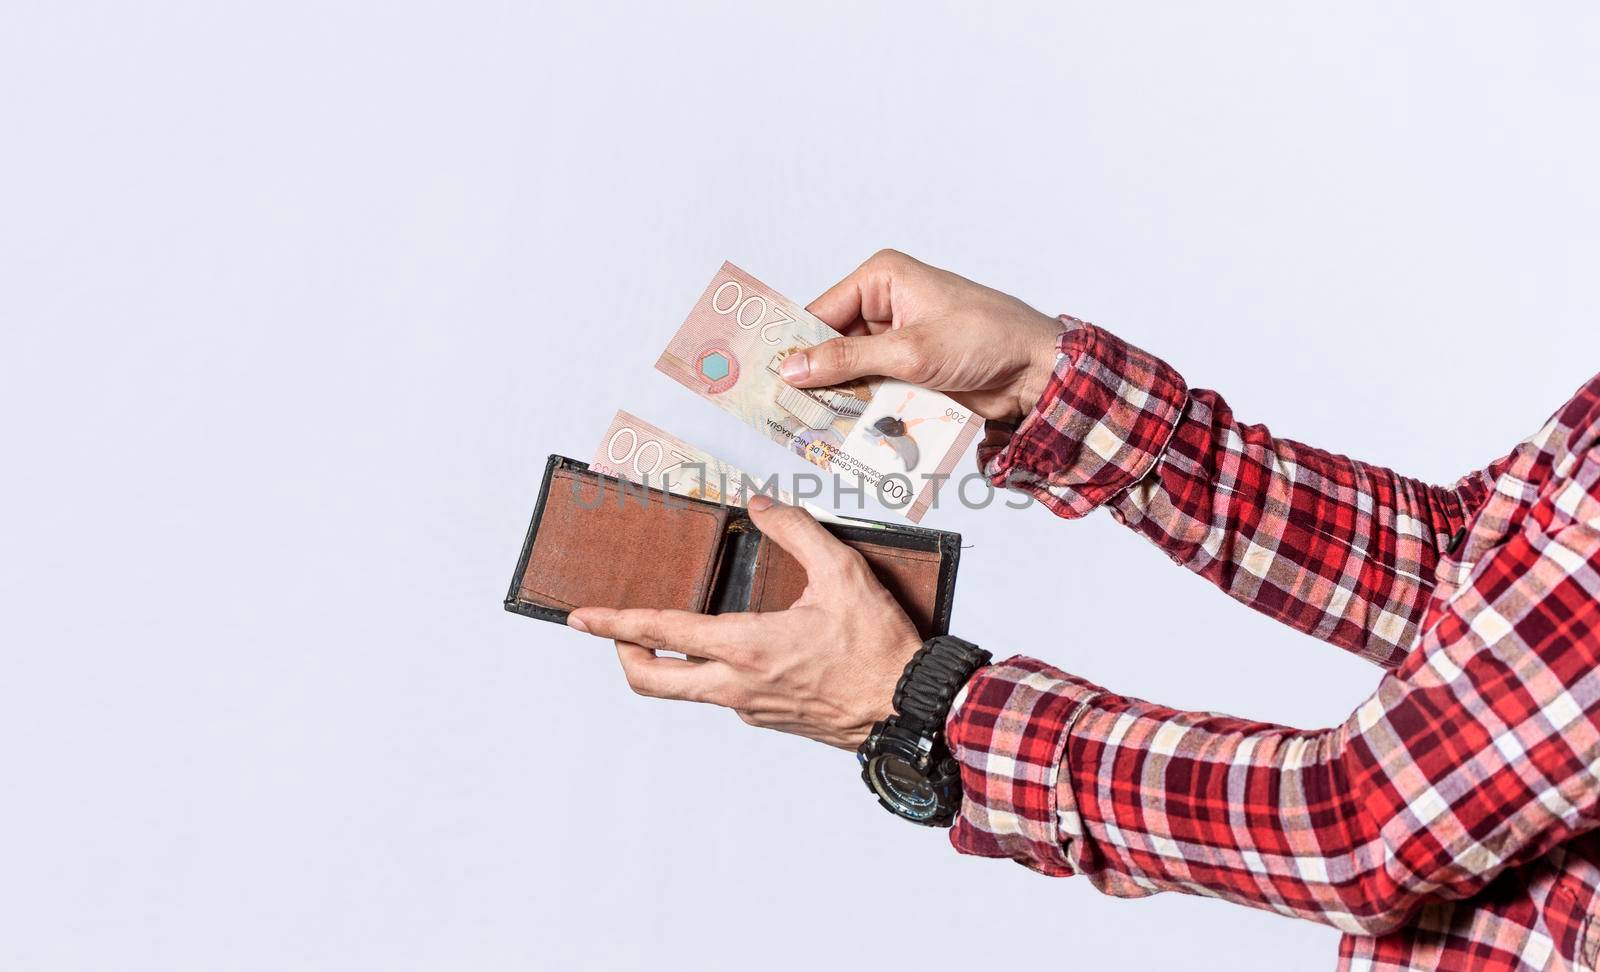 Man taking money out of his wallet, close up of hands taking money out of his wallet isolated, Nicaraguan banknotes, cash payment concept